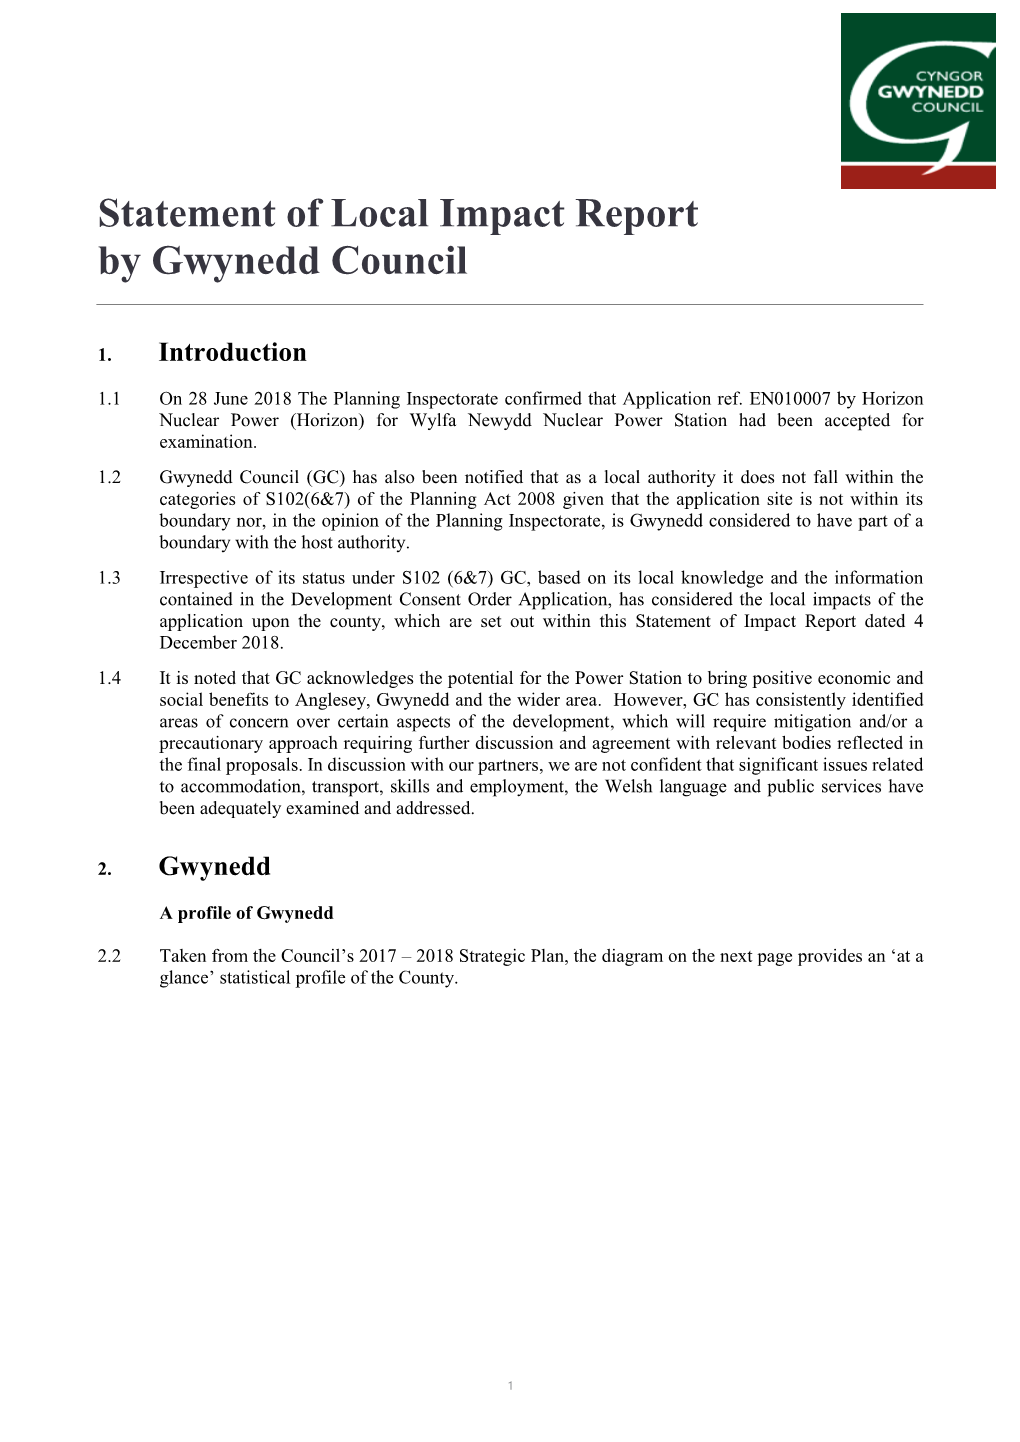 Statement of Local Impact Report by Gwynedd Council